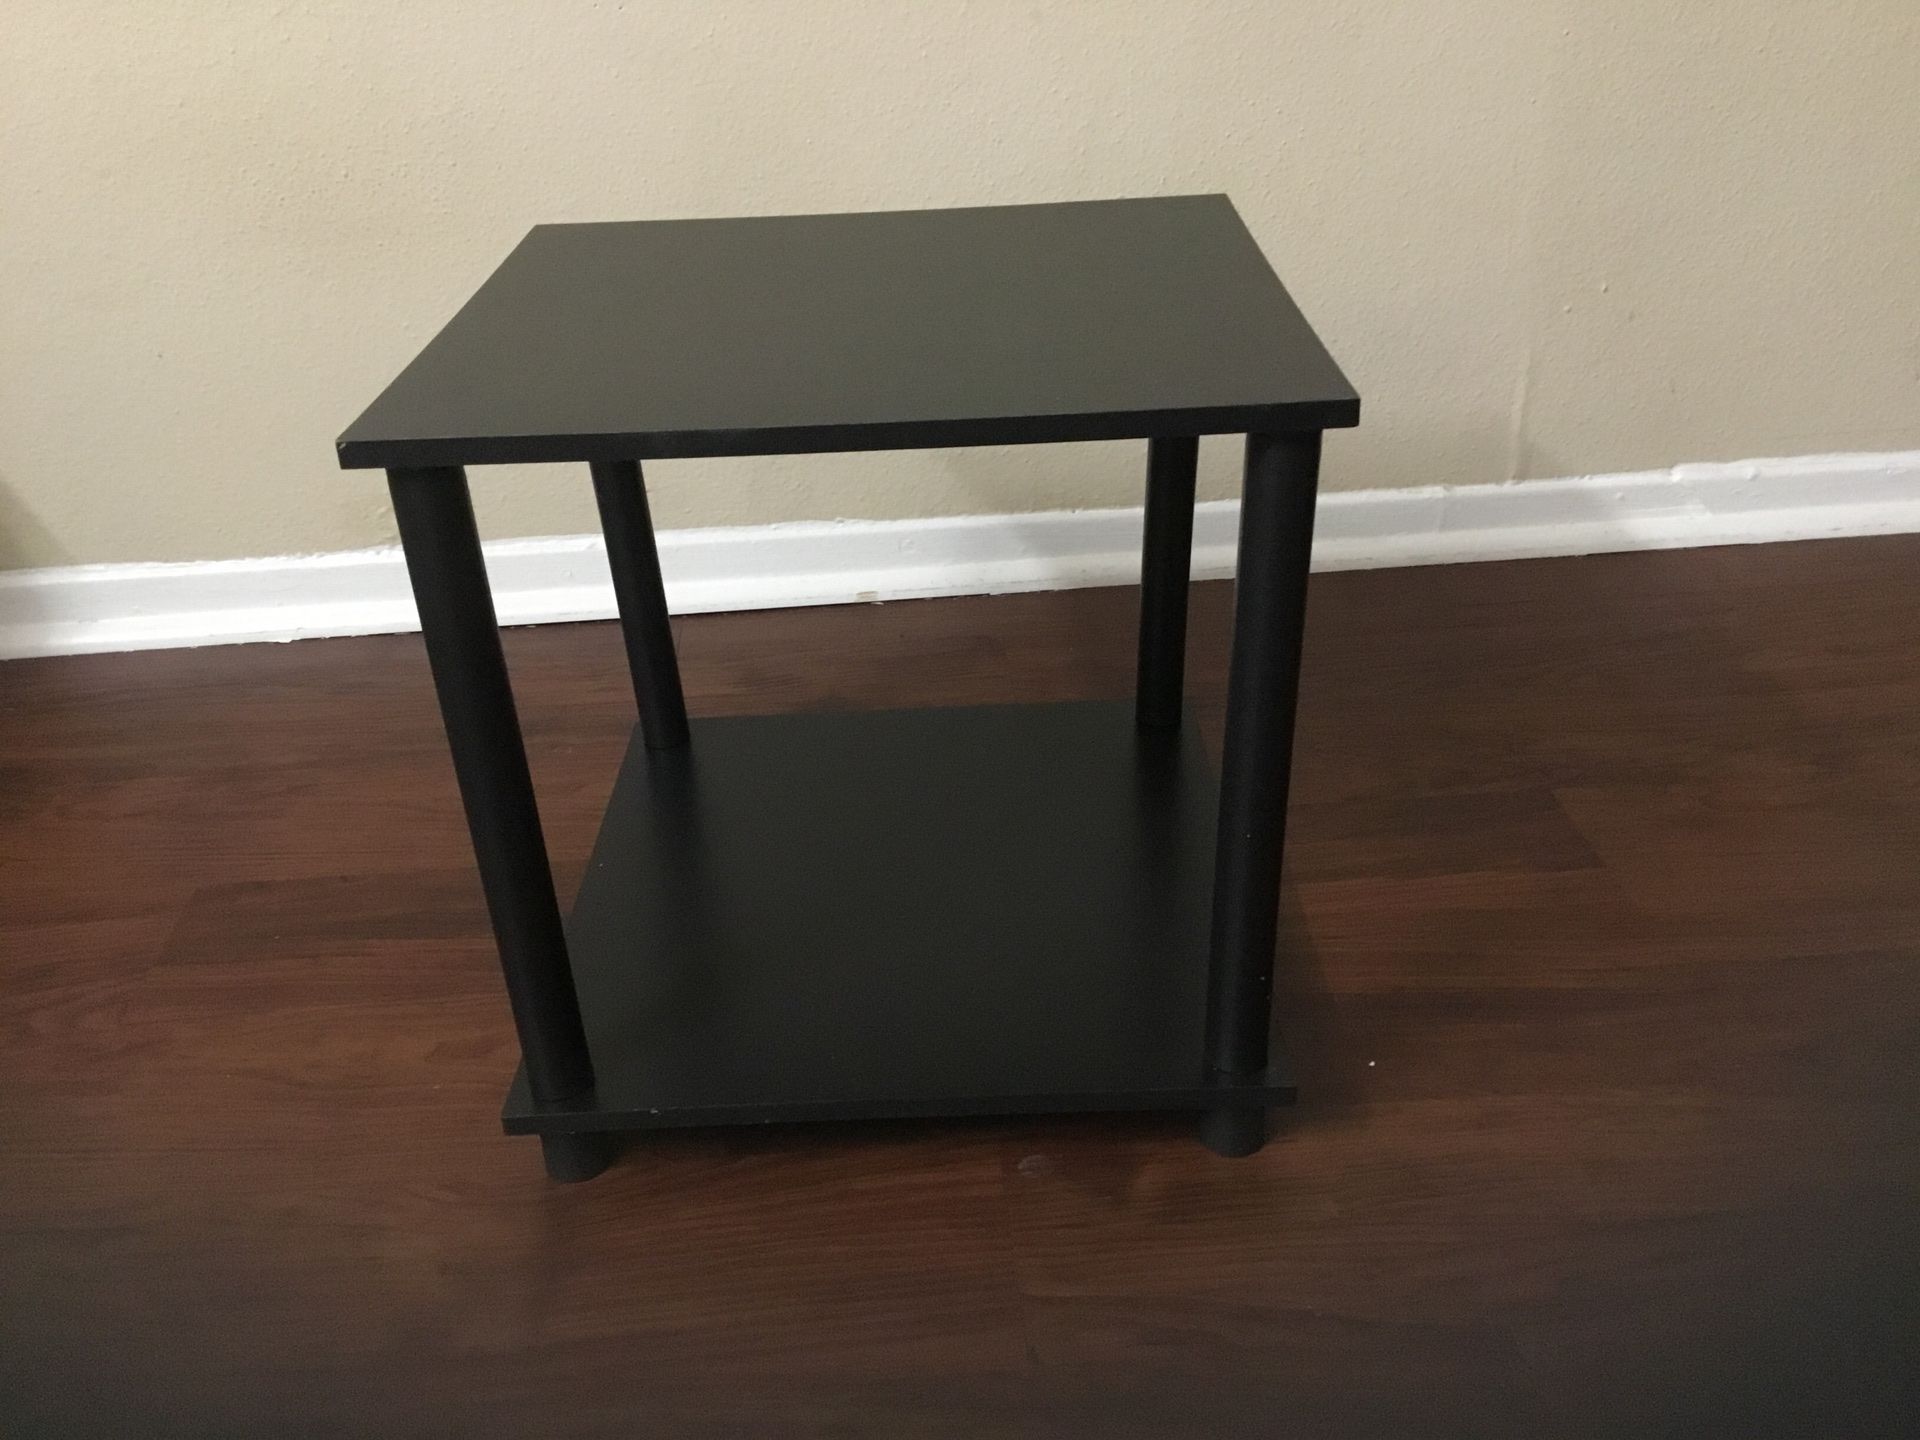 Two end tables with original box - urgent sale